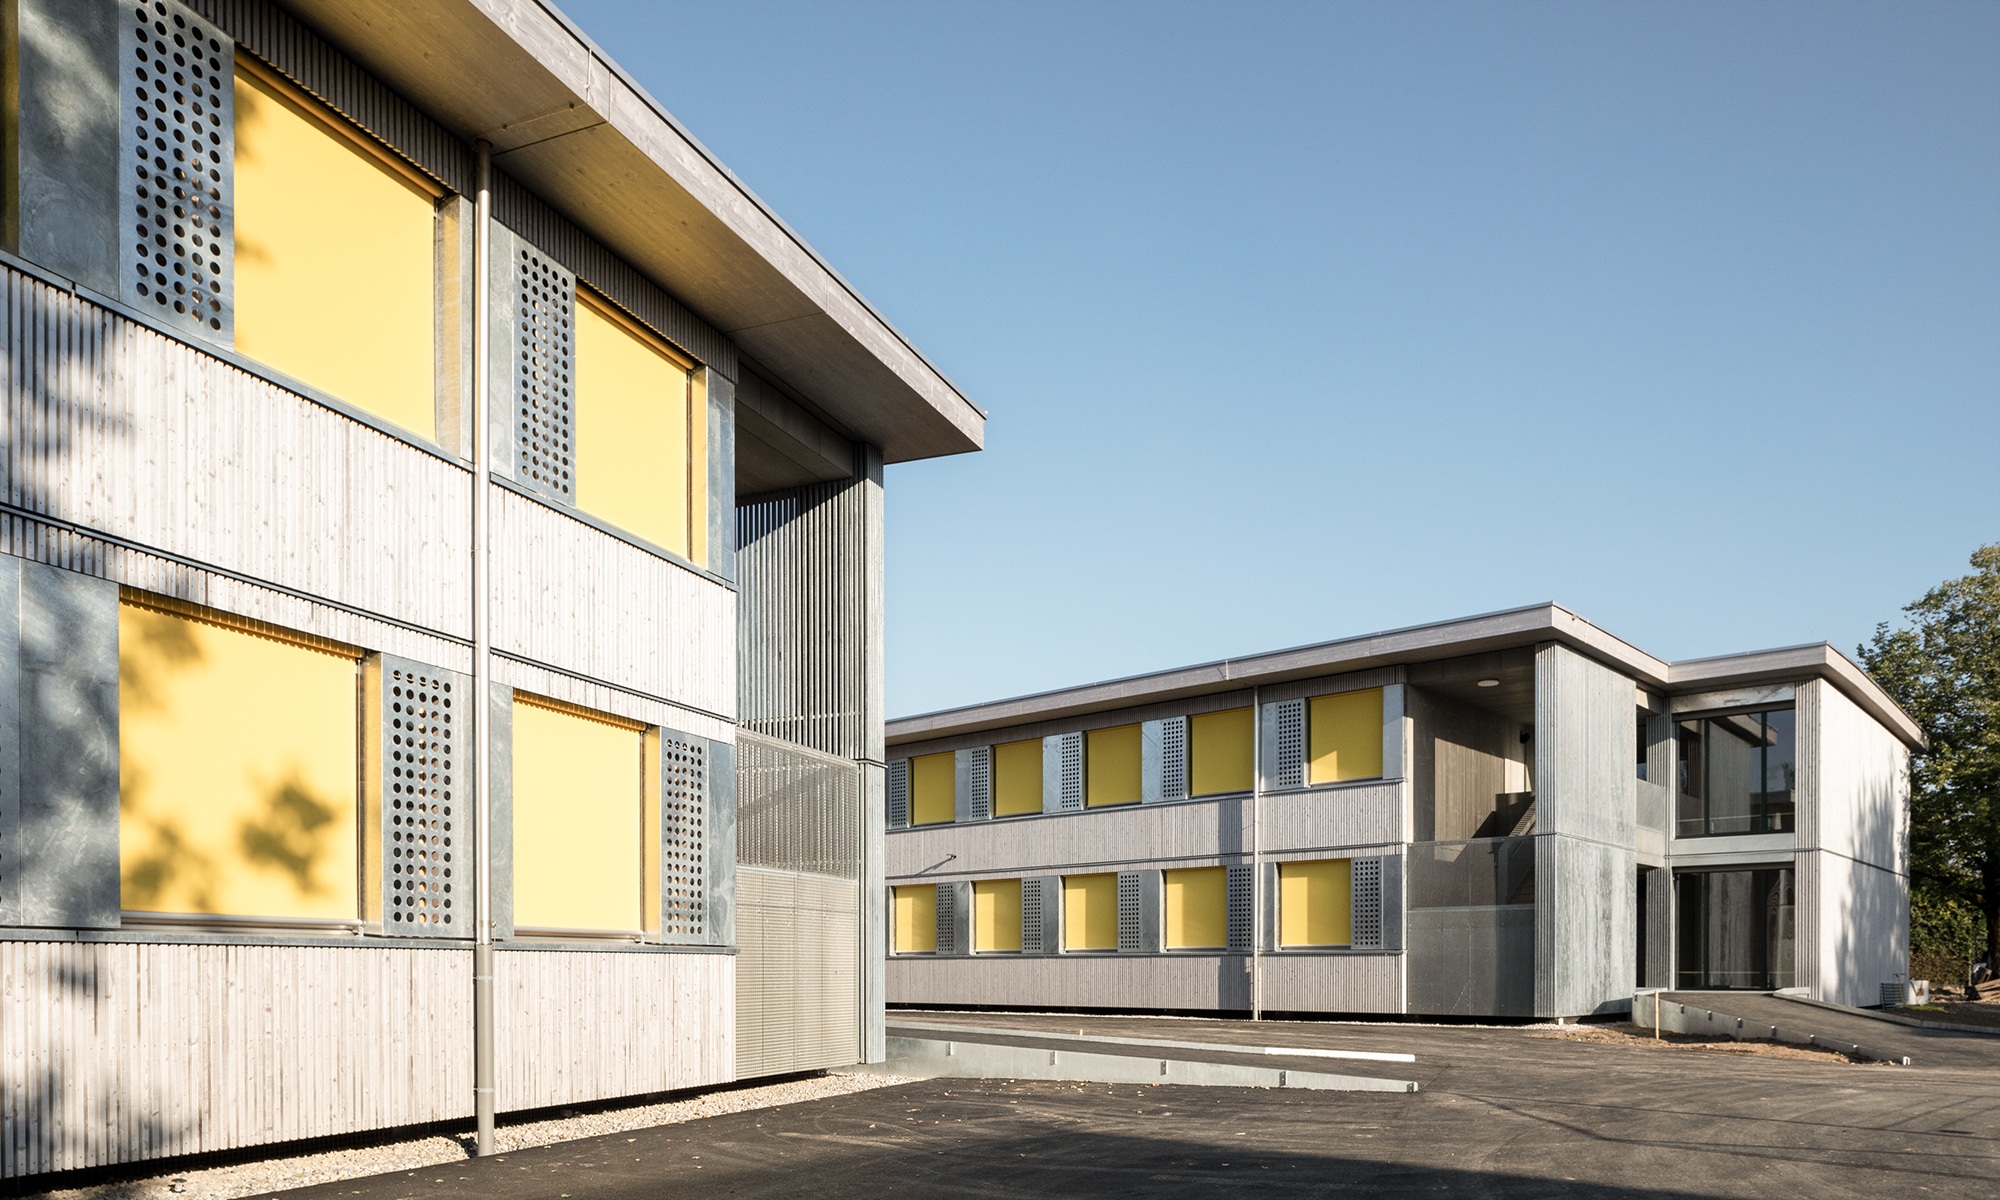 Two-storey Brünnen school pavilions with timber facades and yellow shutters